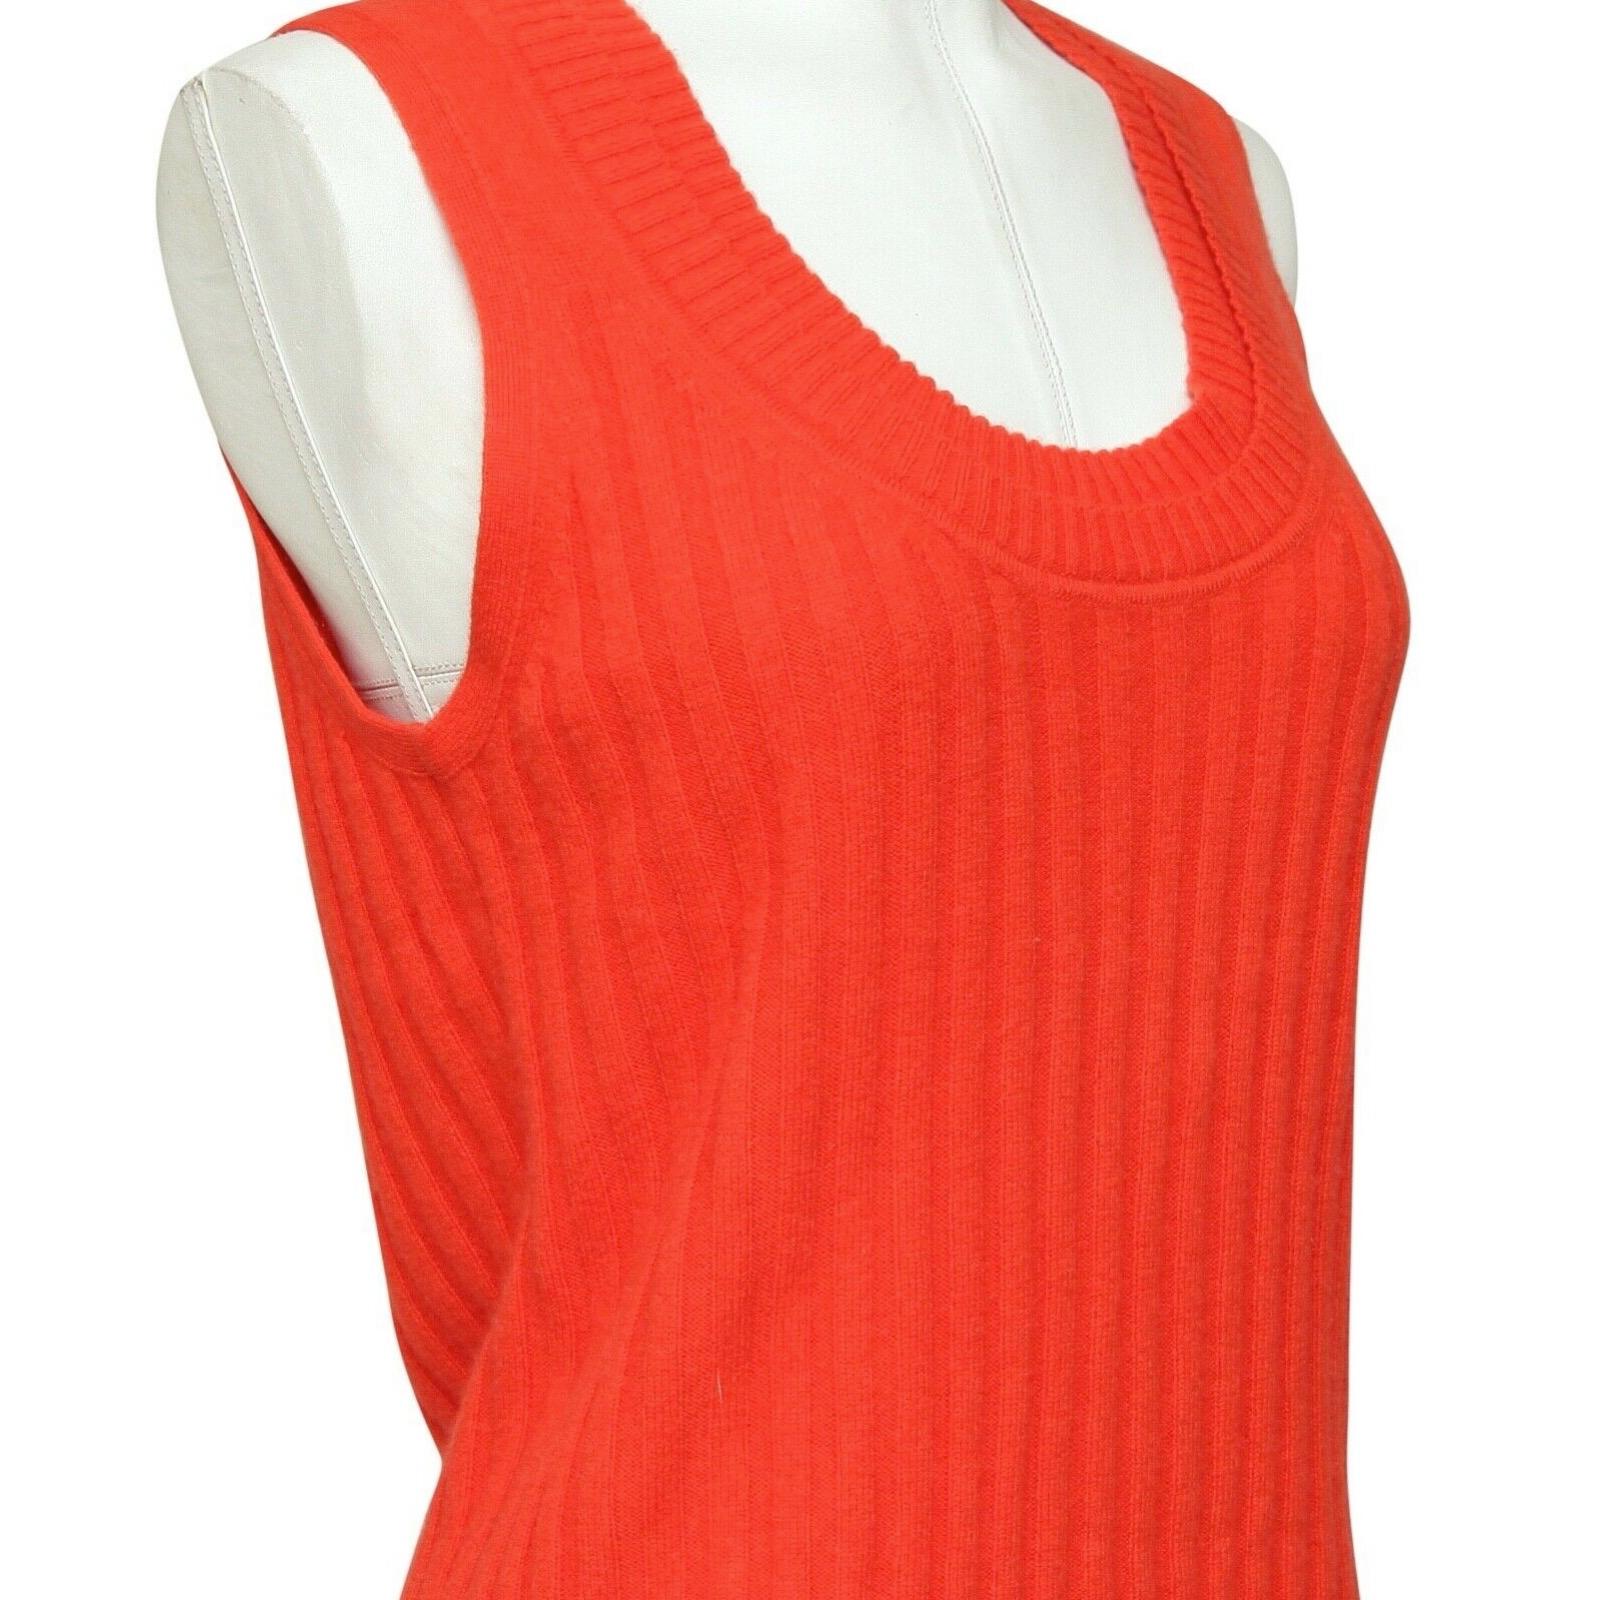 Women's 3.1 PHILLIP LIM Orange Sweater Knit Sleeveless Scoop Neck Ribbed Cashmere L NWT For Sale